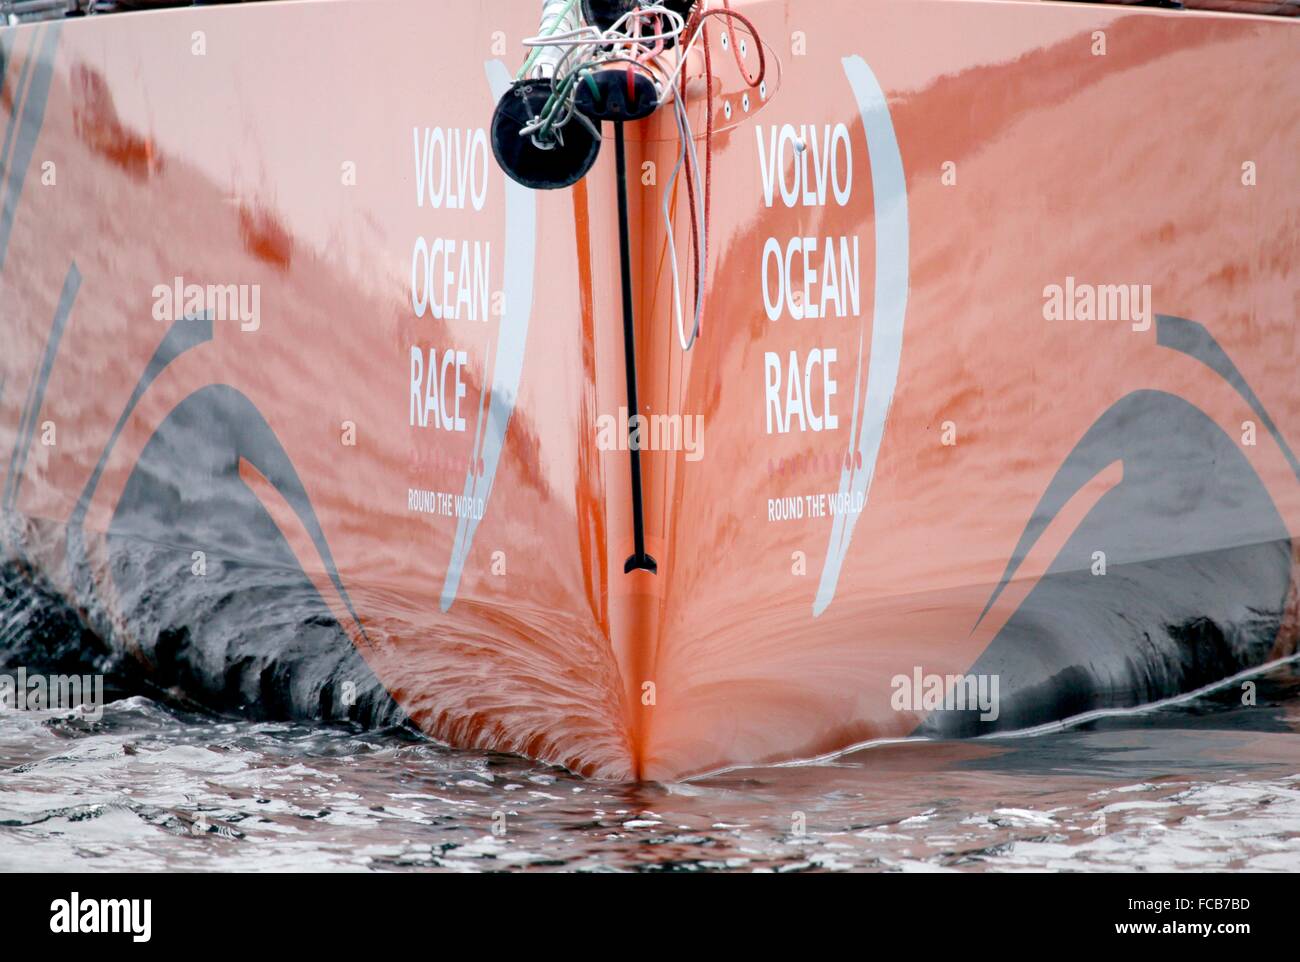 Stop over of the Volvo Ocean Race in Lorient, Brittany, France. Stock Photo